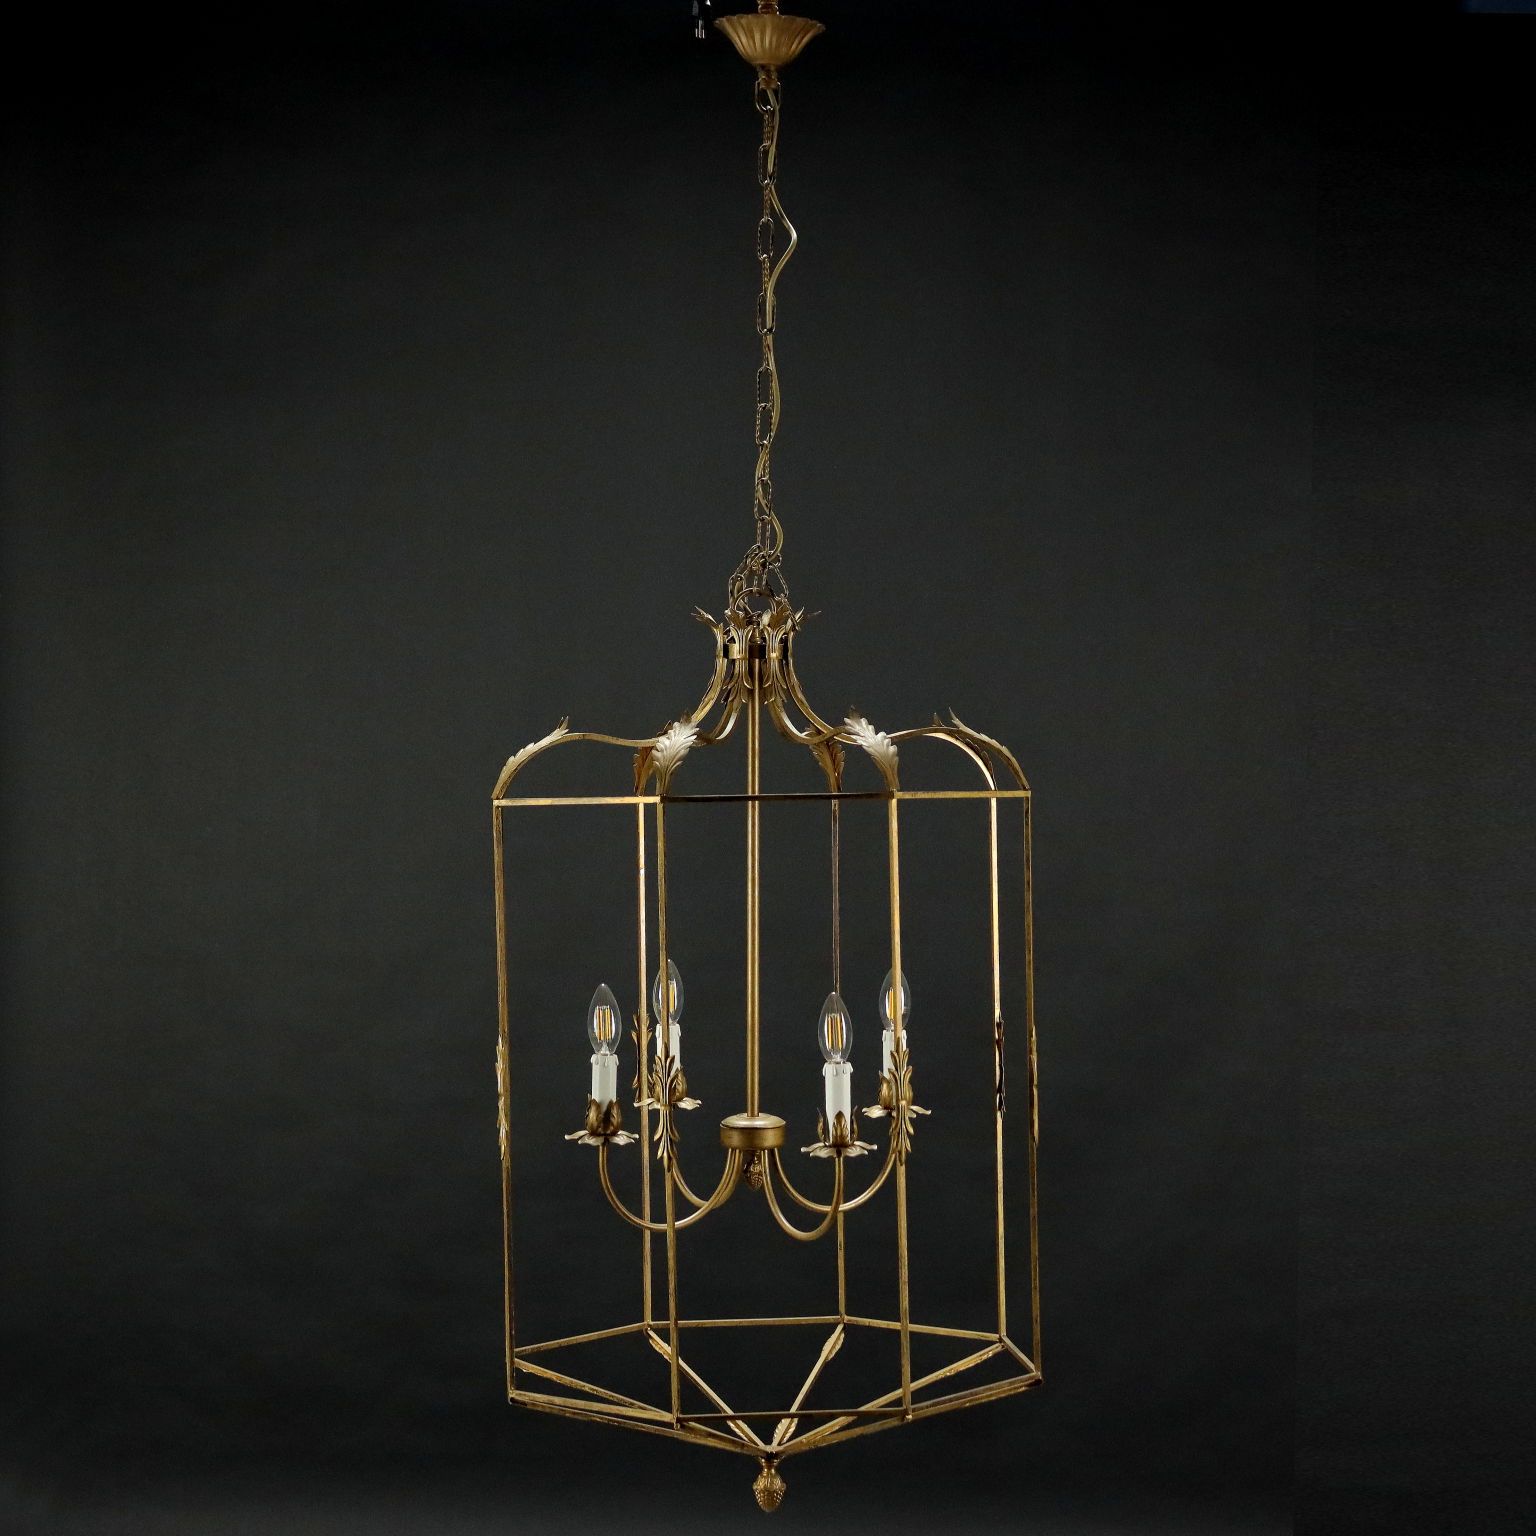 Antique Gild Lantern Chandeliers Intended For Widely Used Chandelier Bronze Italy Xx Century, Italy Early 20th Century, Antiques,  Chandeliers And Lamps, Dimanoinmano (View 1 of 15)